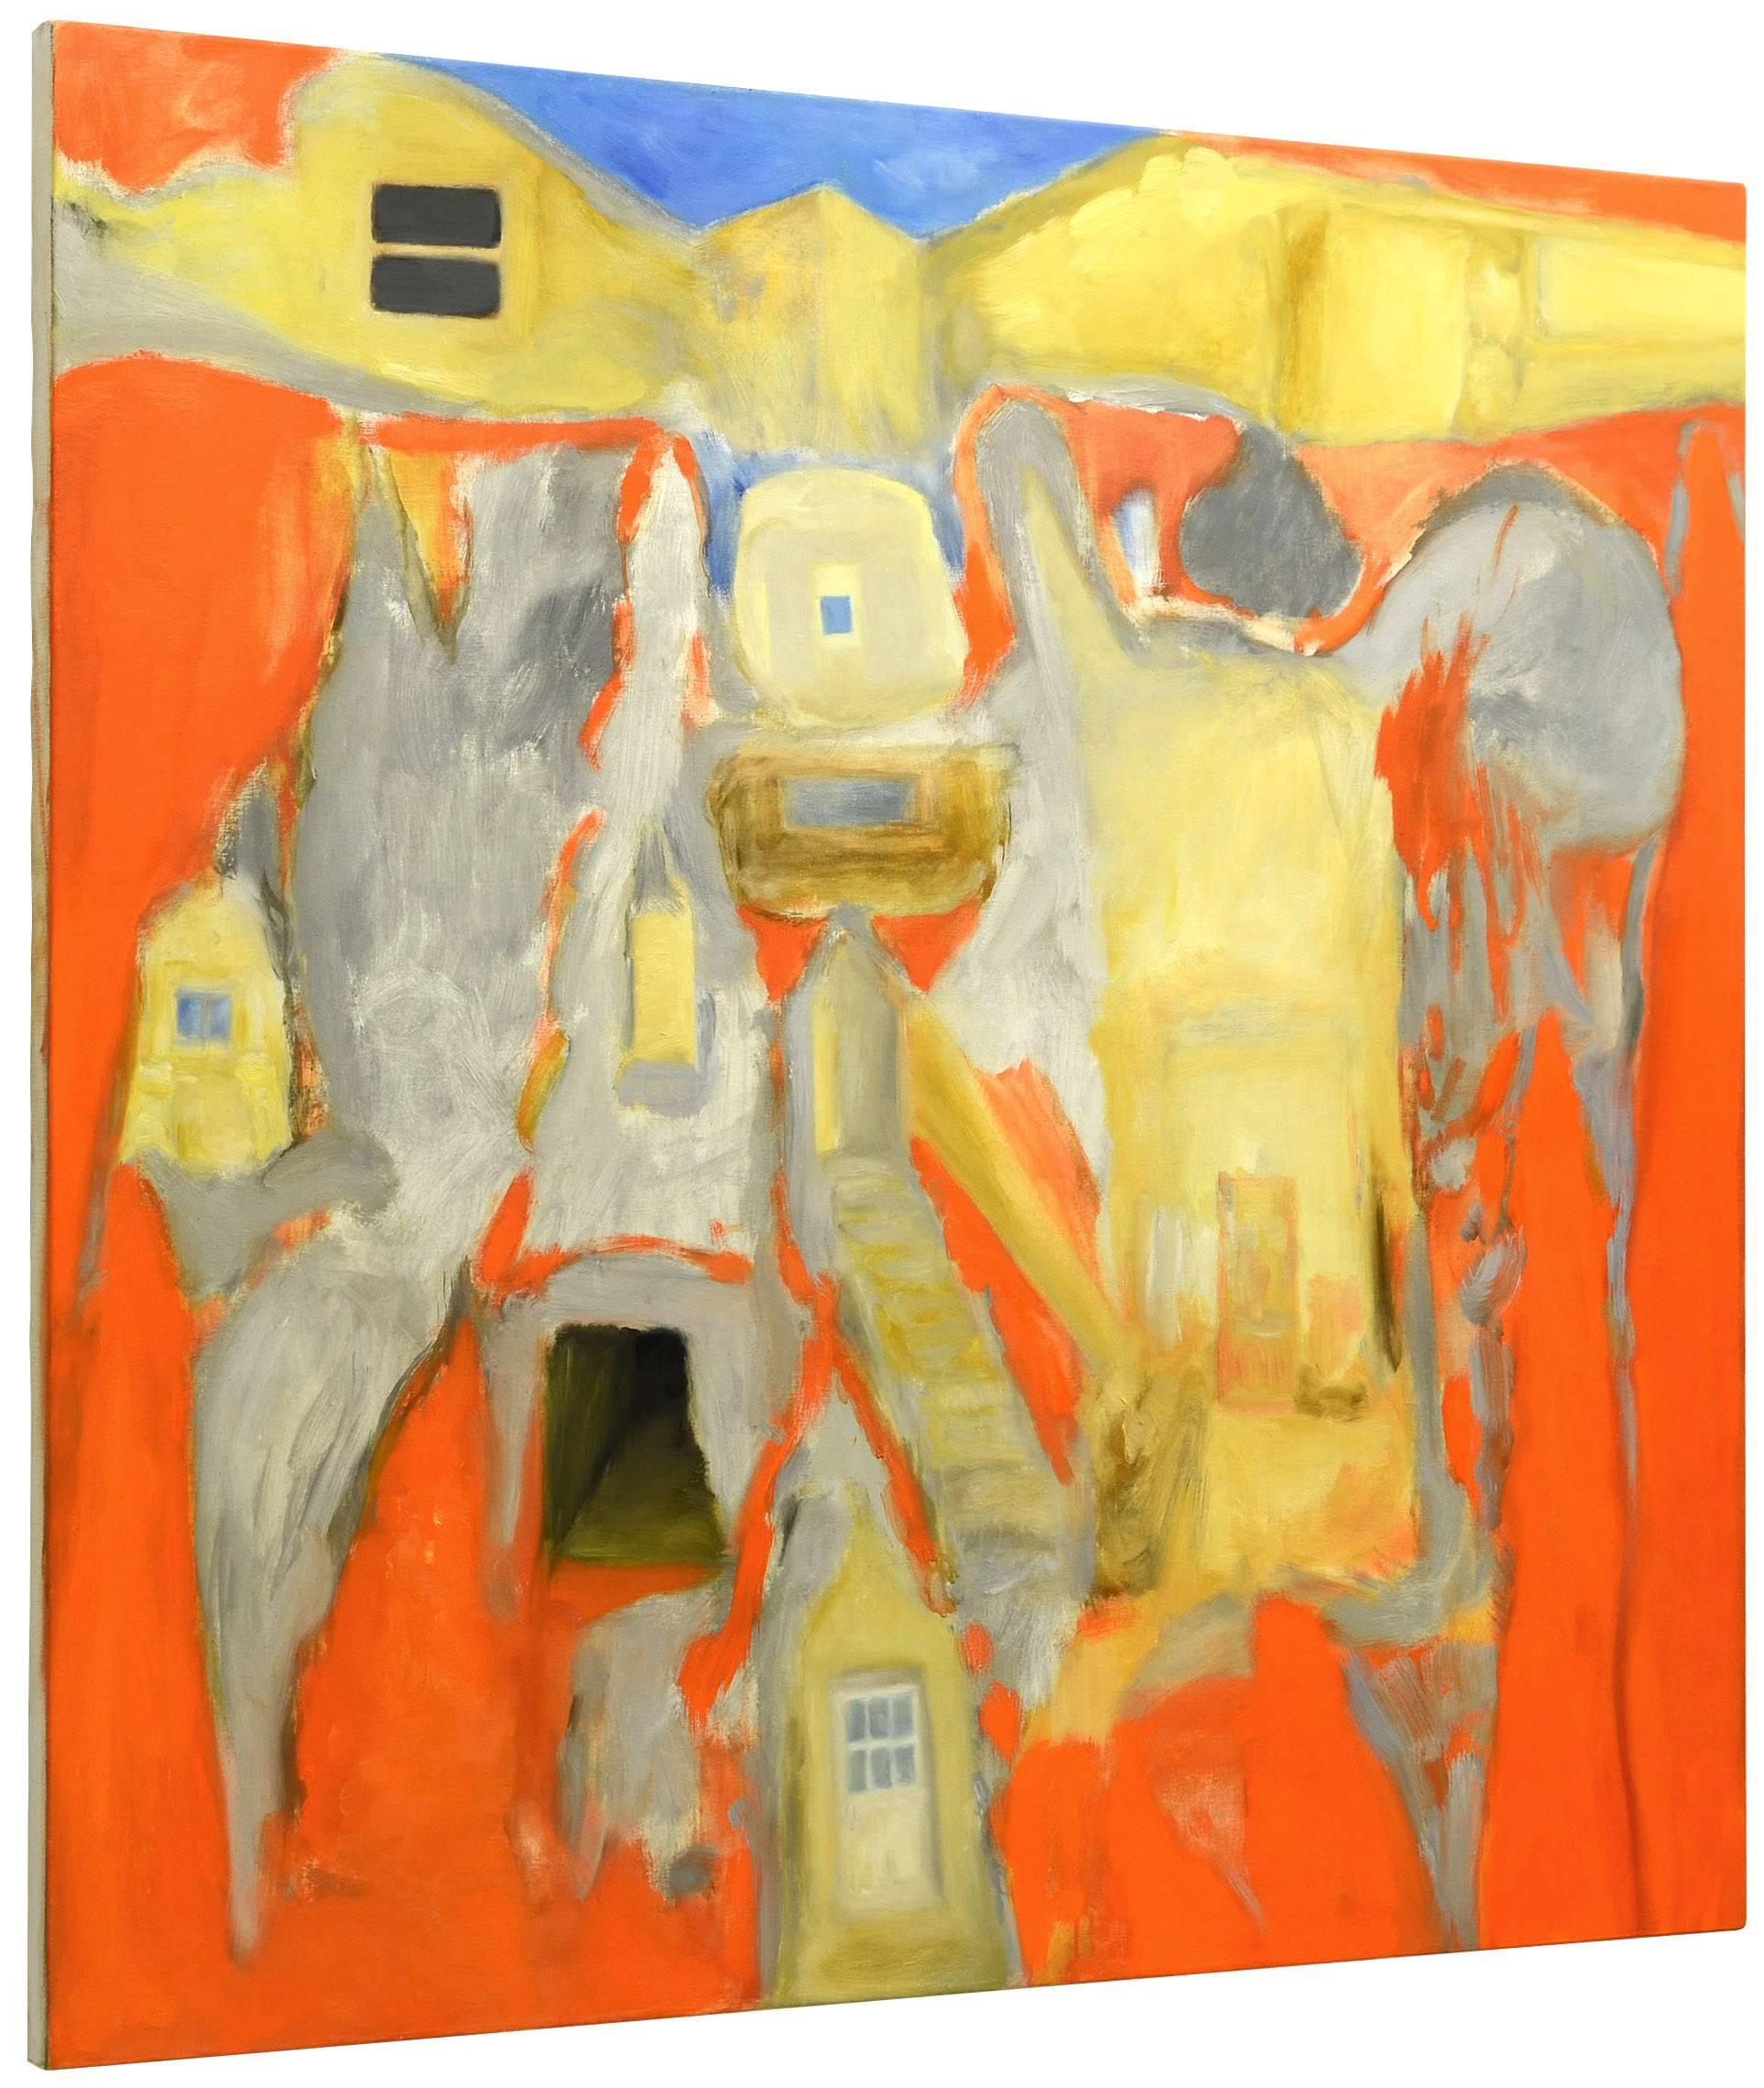 Gold and Grey - Orange Throughout - Blue Everlasting - Painting by John Benicewicz